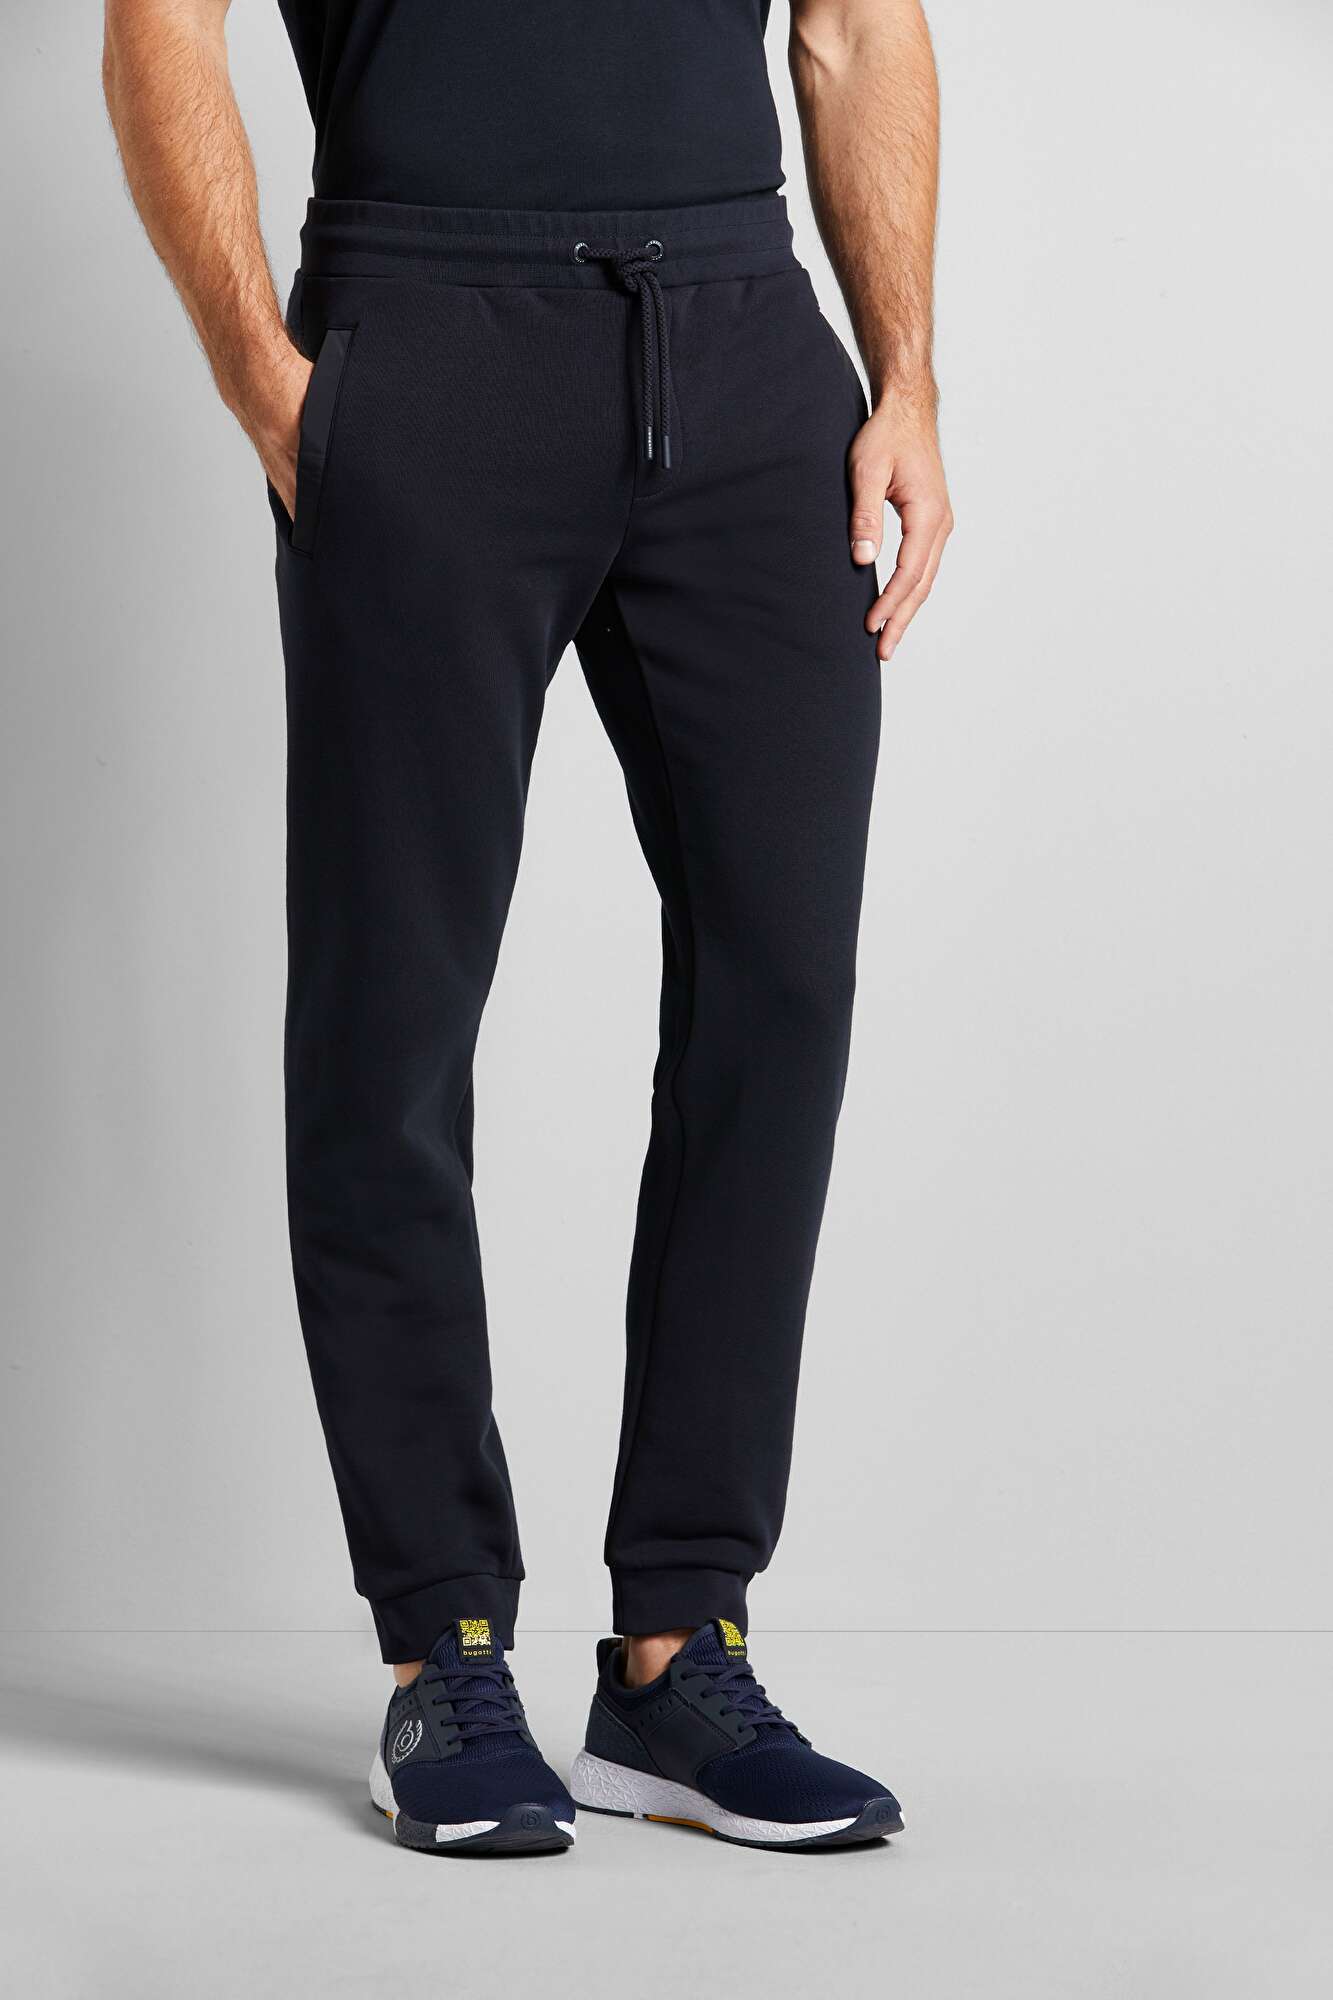 long leg in With navy Sweatpants